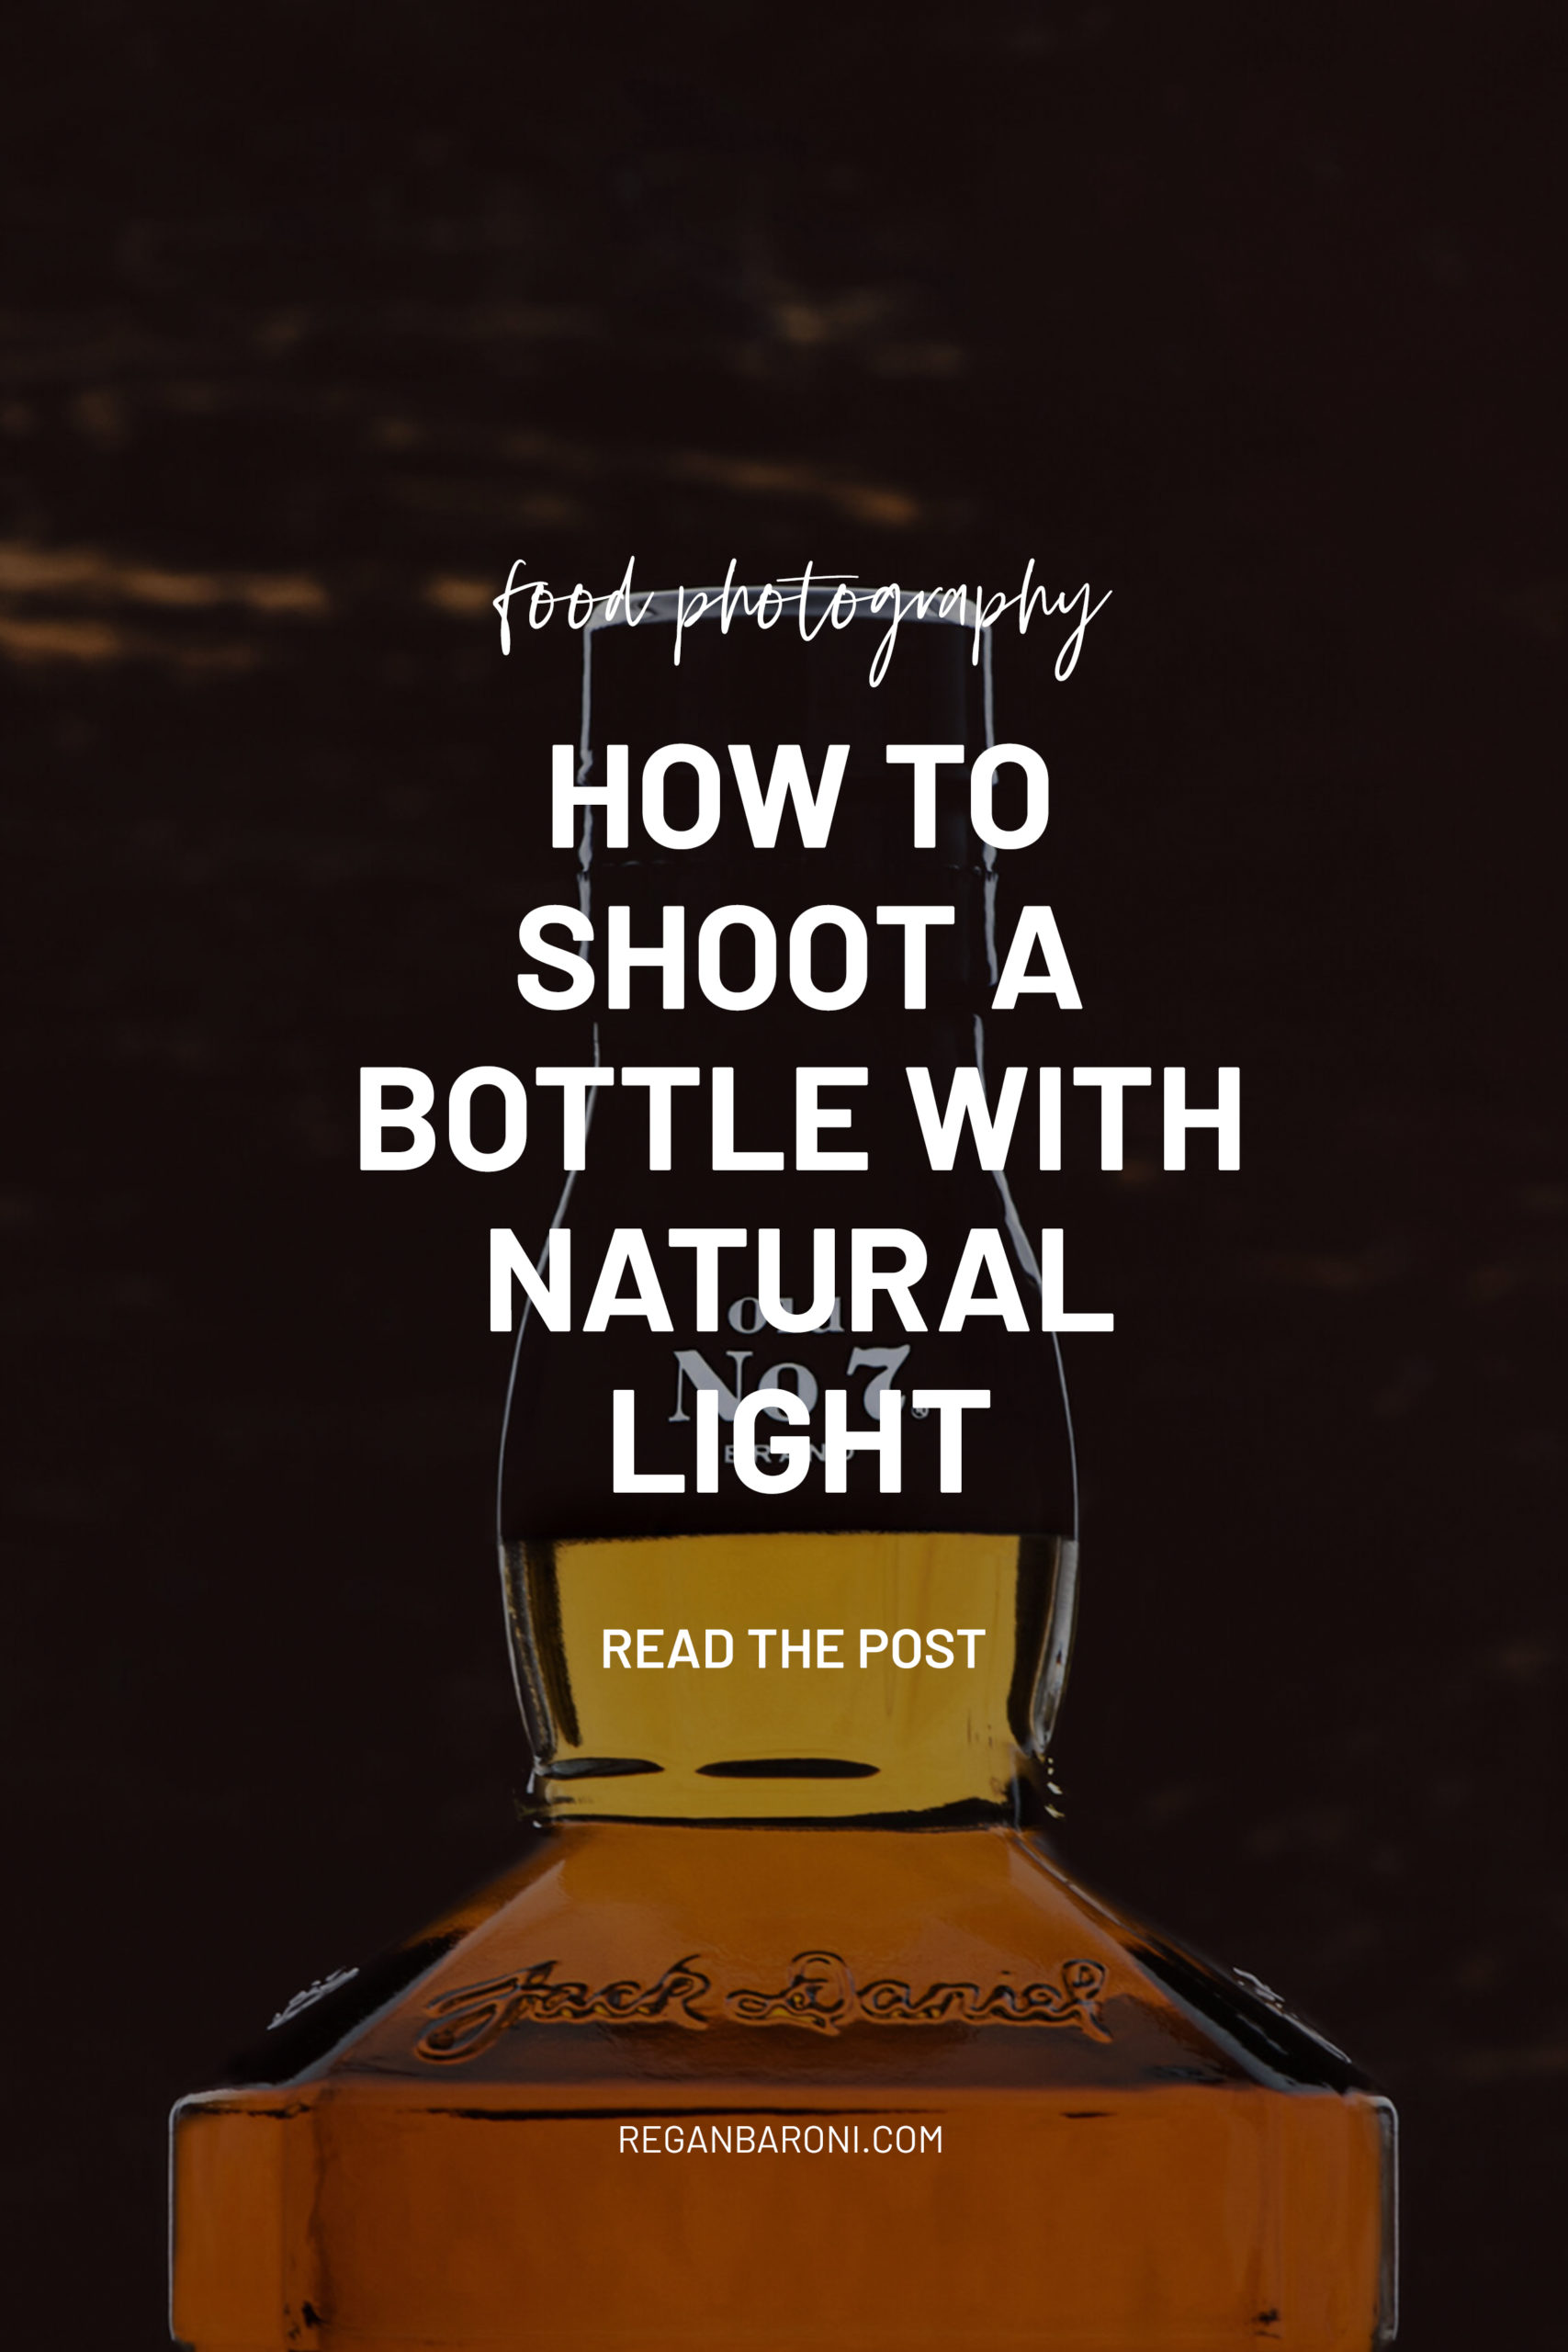 How To Shoot A Bottle With Natural Light